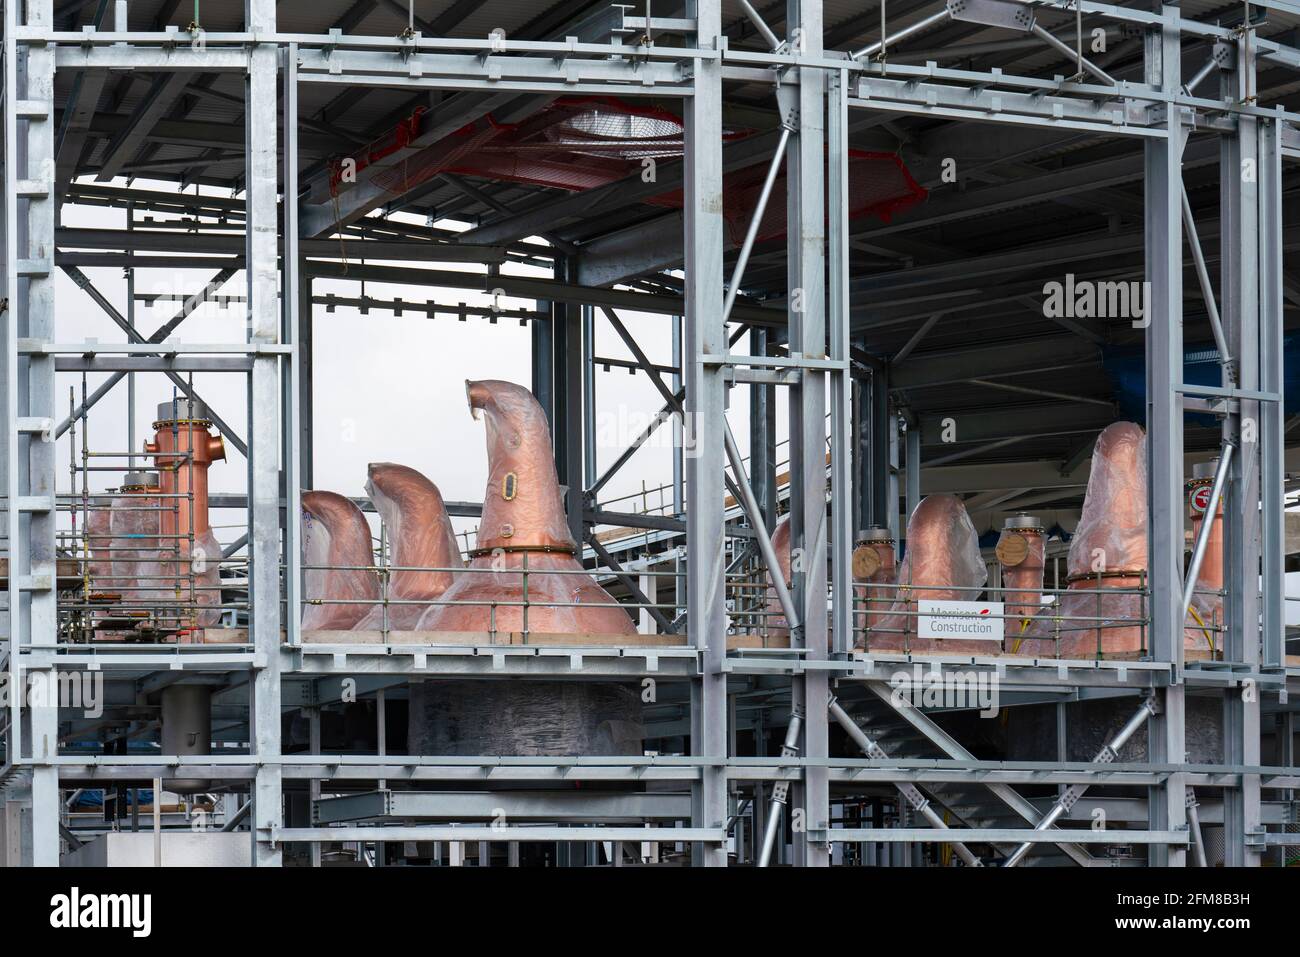 New copper distillation stills visible during construction of scotch whisky distillery for Gordon & MacPhail in Speyside at Craggan, Grantown-on-Spey Stock Photo